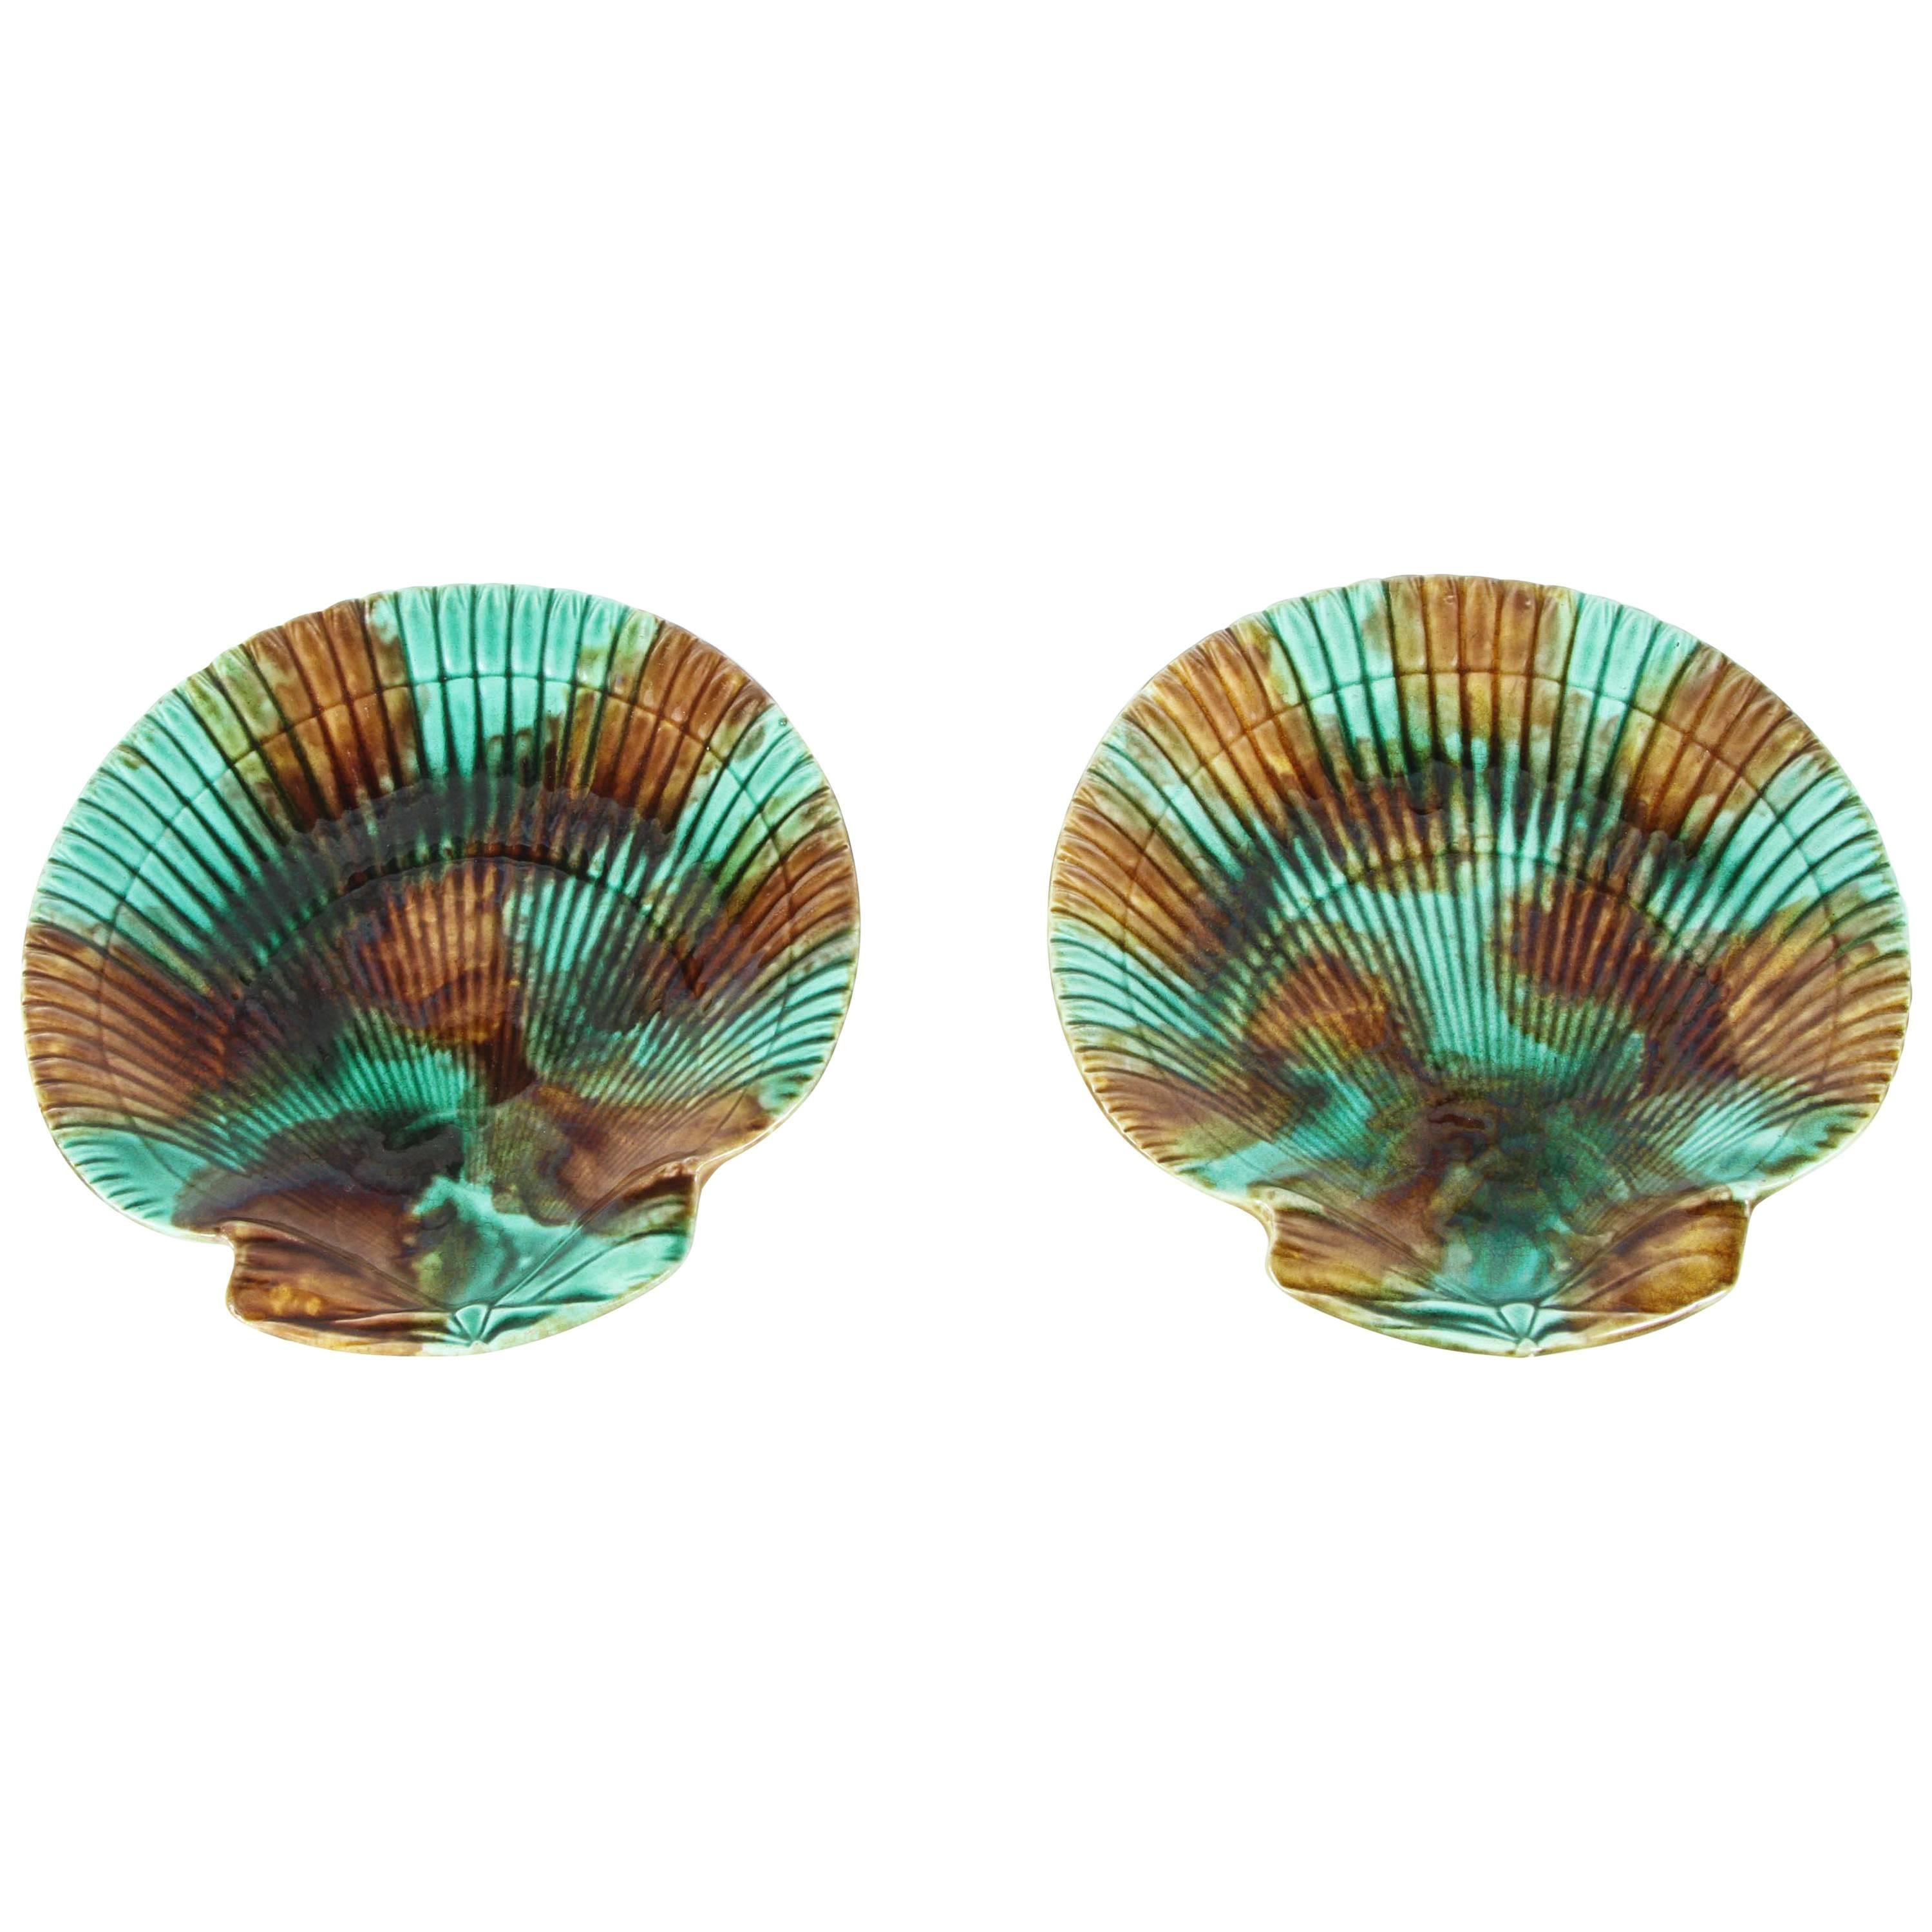 Pair of Wedgwood Shell Plates with Mottled Majolica Glaze, 19th Century